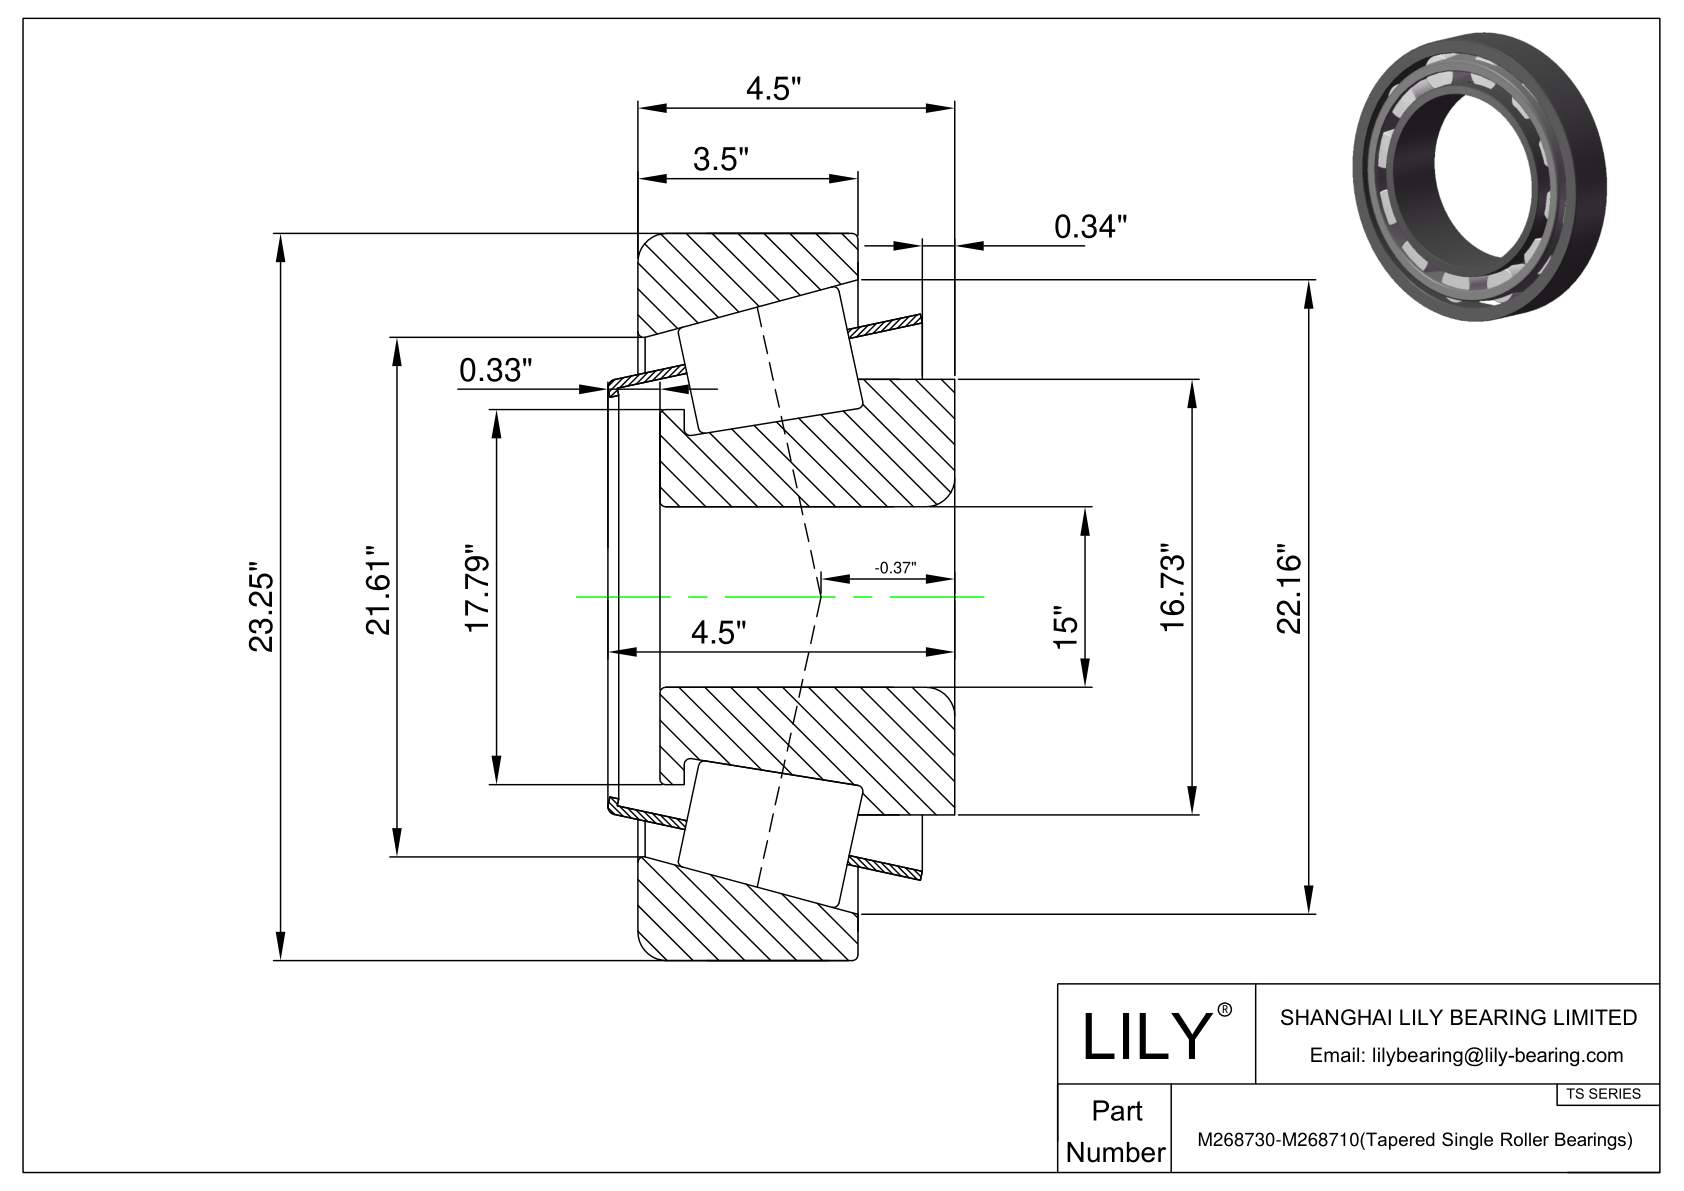 M268730-M268710 TS (Tapered Single Roller Bearings) (Imperial) cad drawing